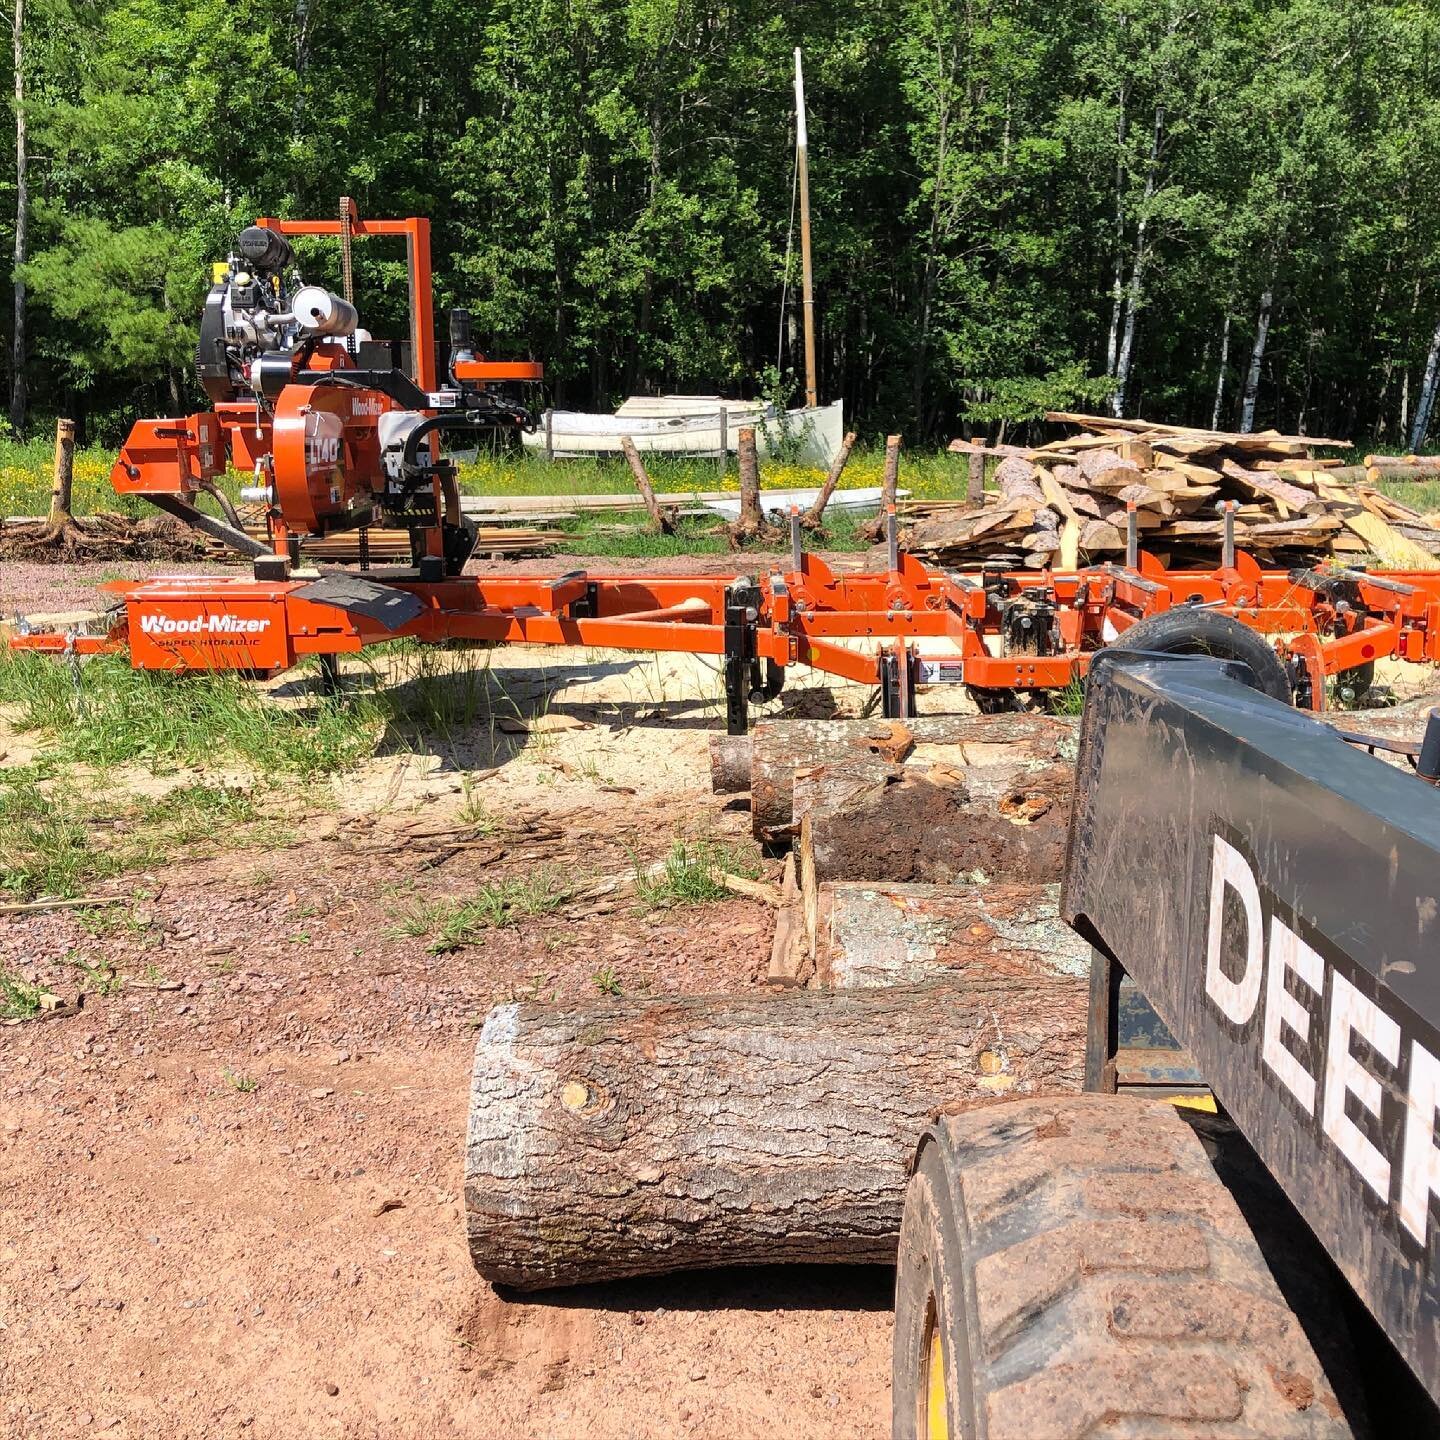 Not boat lumber, but  I&rsquo;m having fun putting some credence on the blue tooth and working though a bit of white pine for a neighbor.  #woodmizerwednesday #woodmizer #whitepine #lumber #sawmill #johndeere #credenceclearwaterrevival #growninwiscon